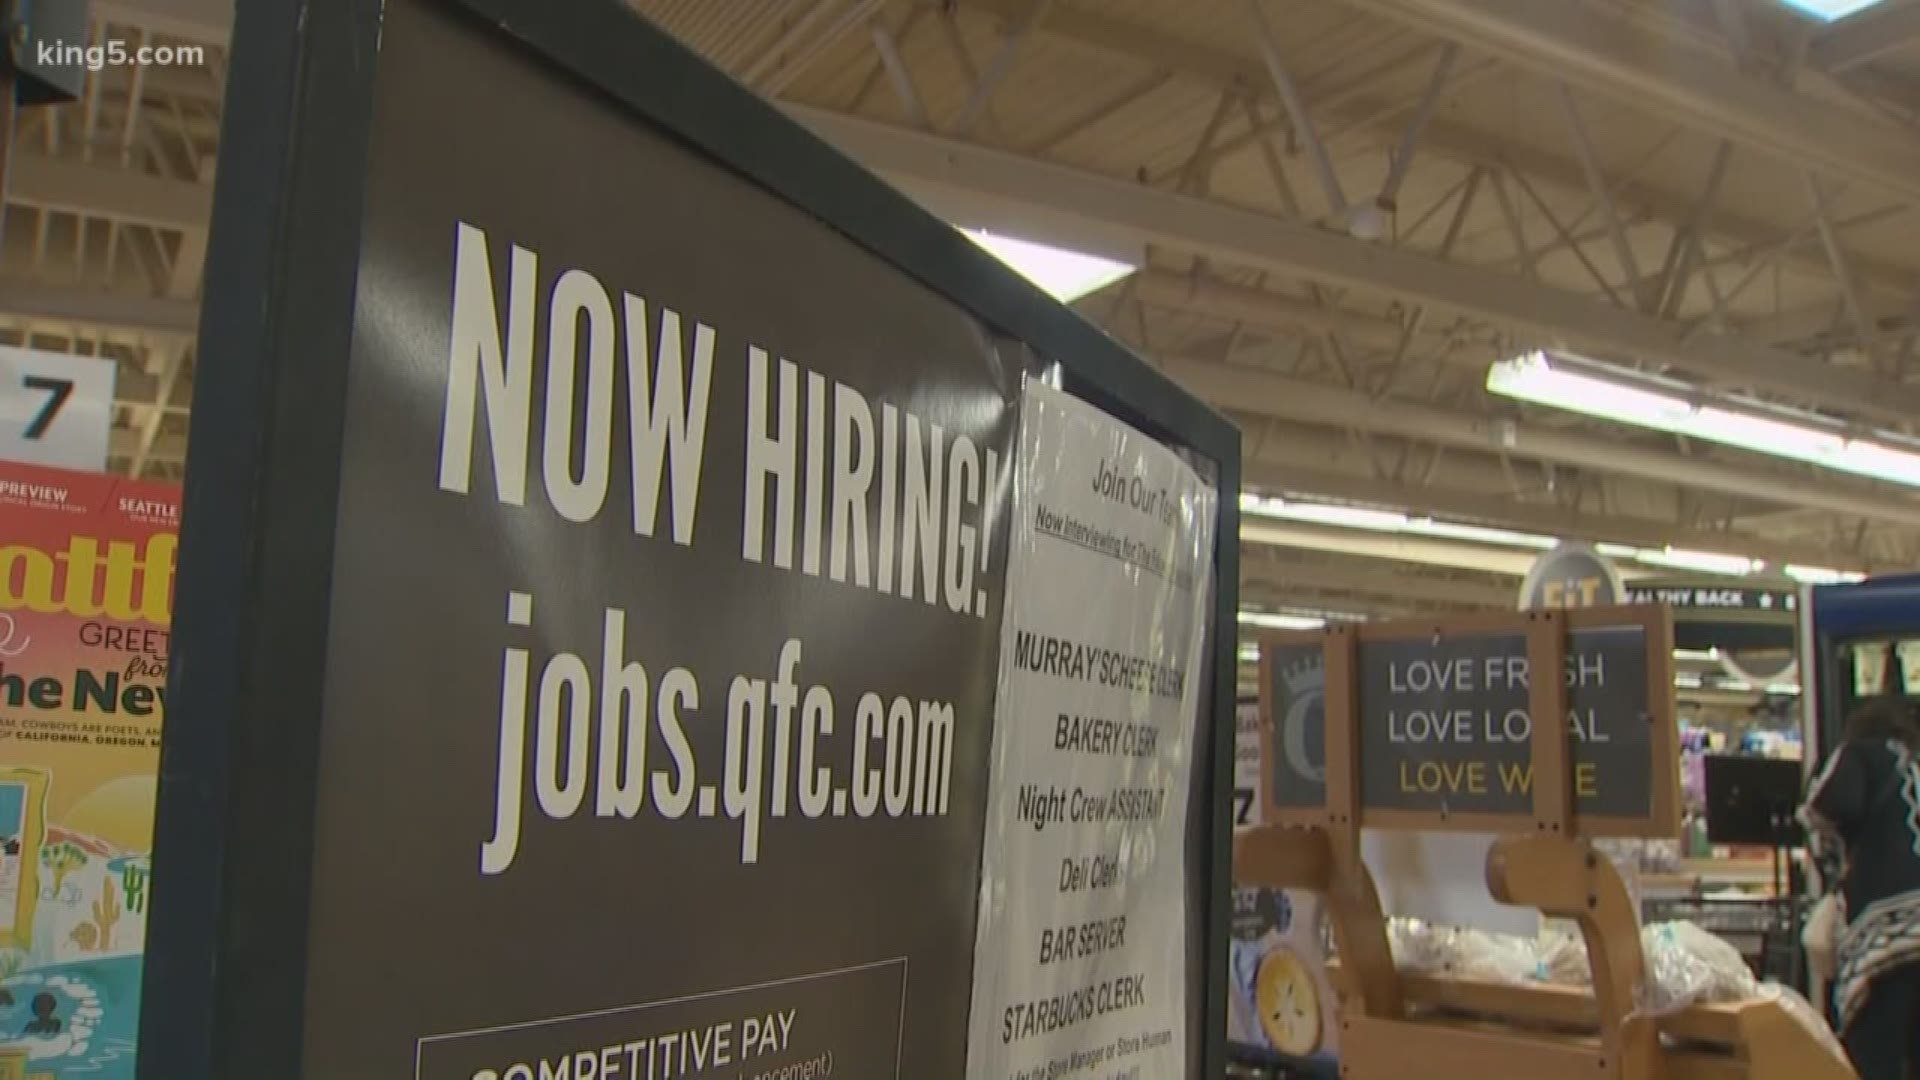 While some small businesses are struggling during the coronavirus outbreak, grocery stores like QFC are desperate for more help and hosting hiring fairs.